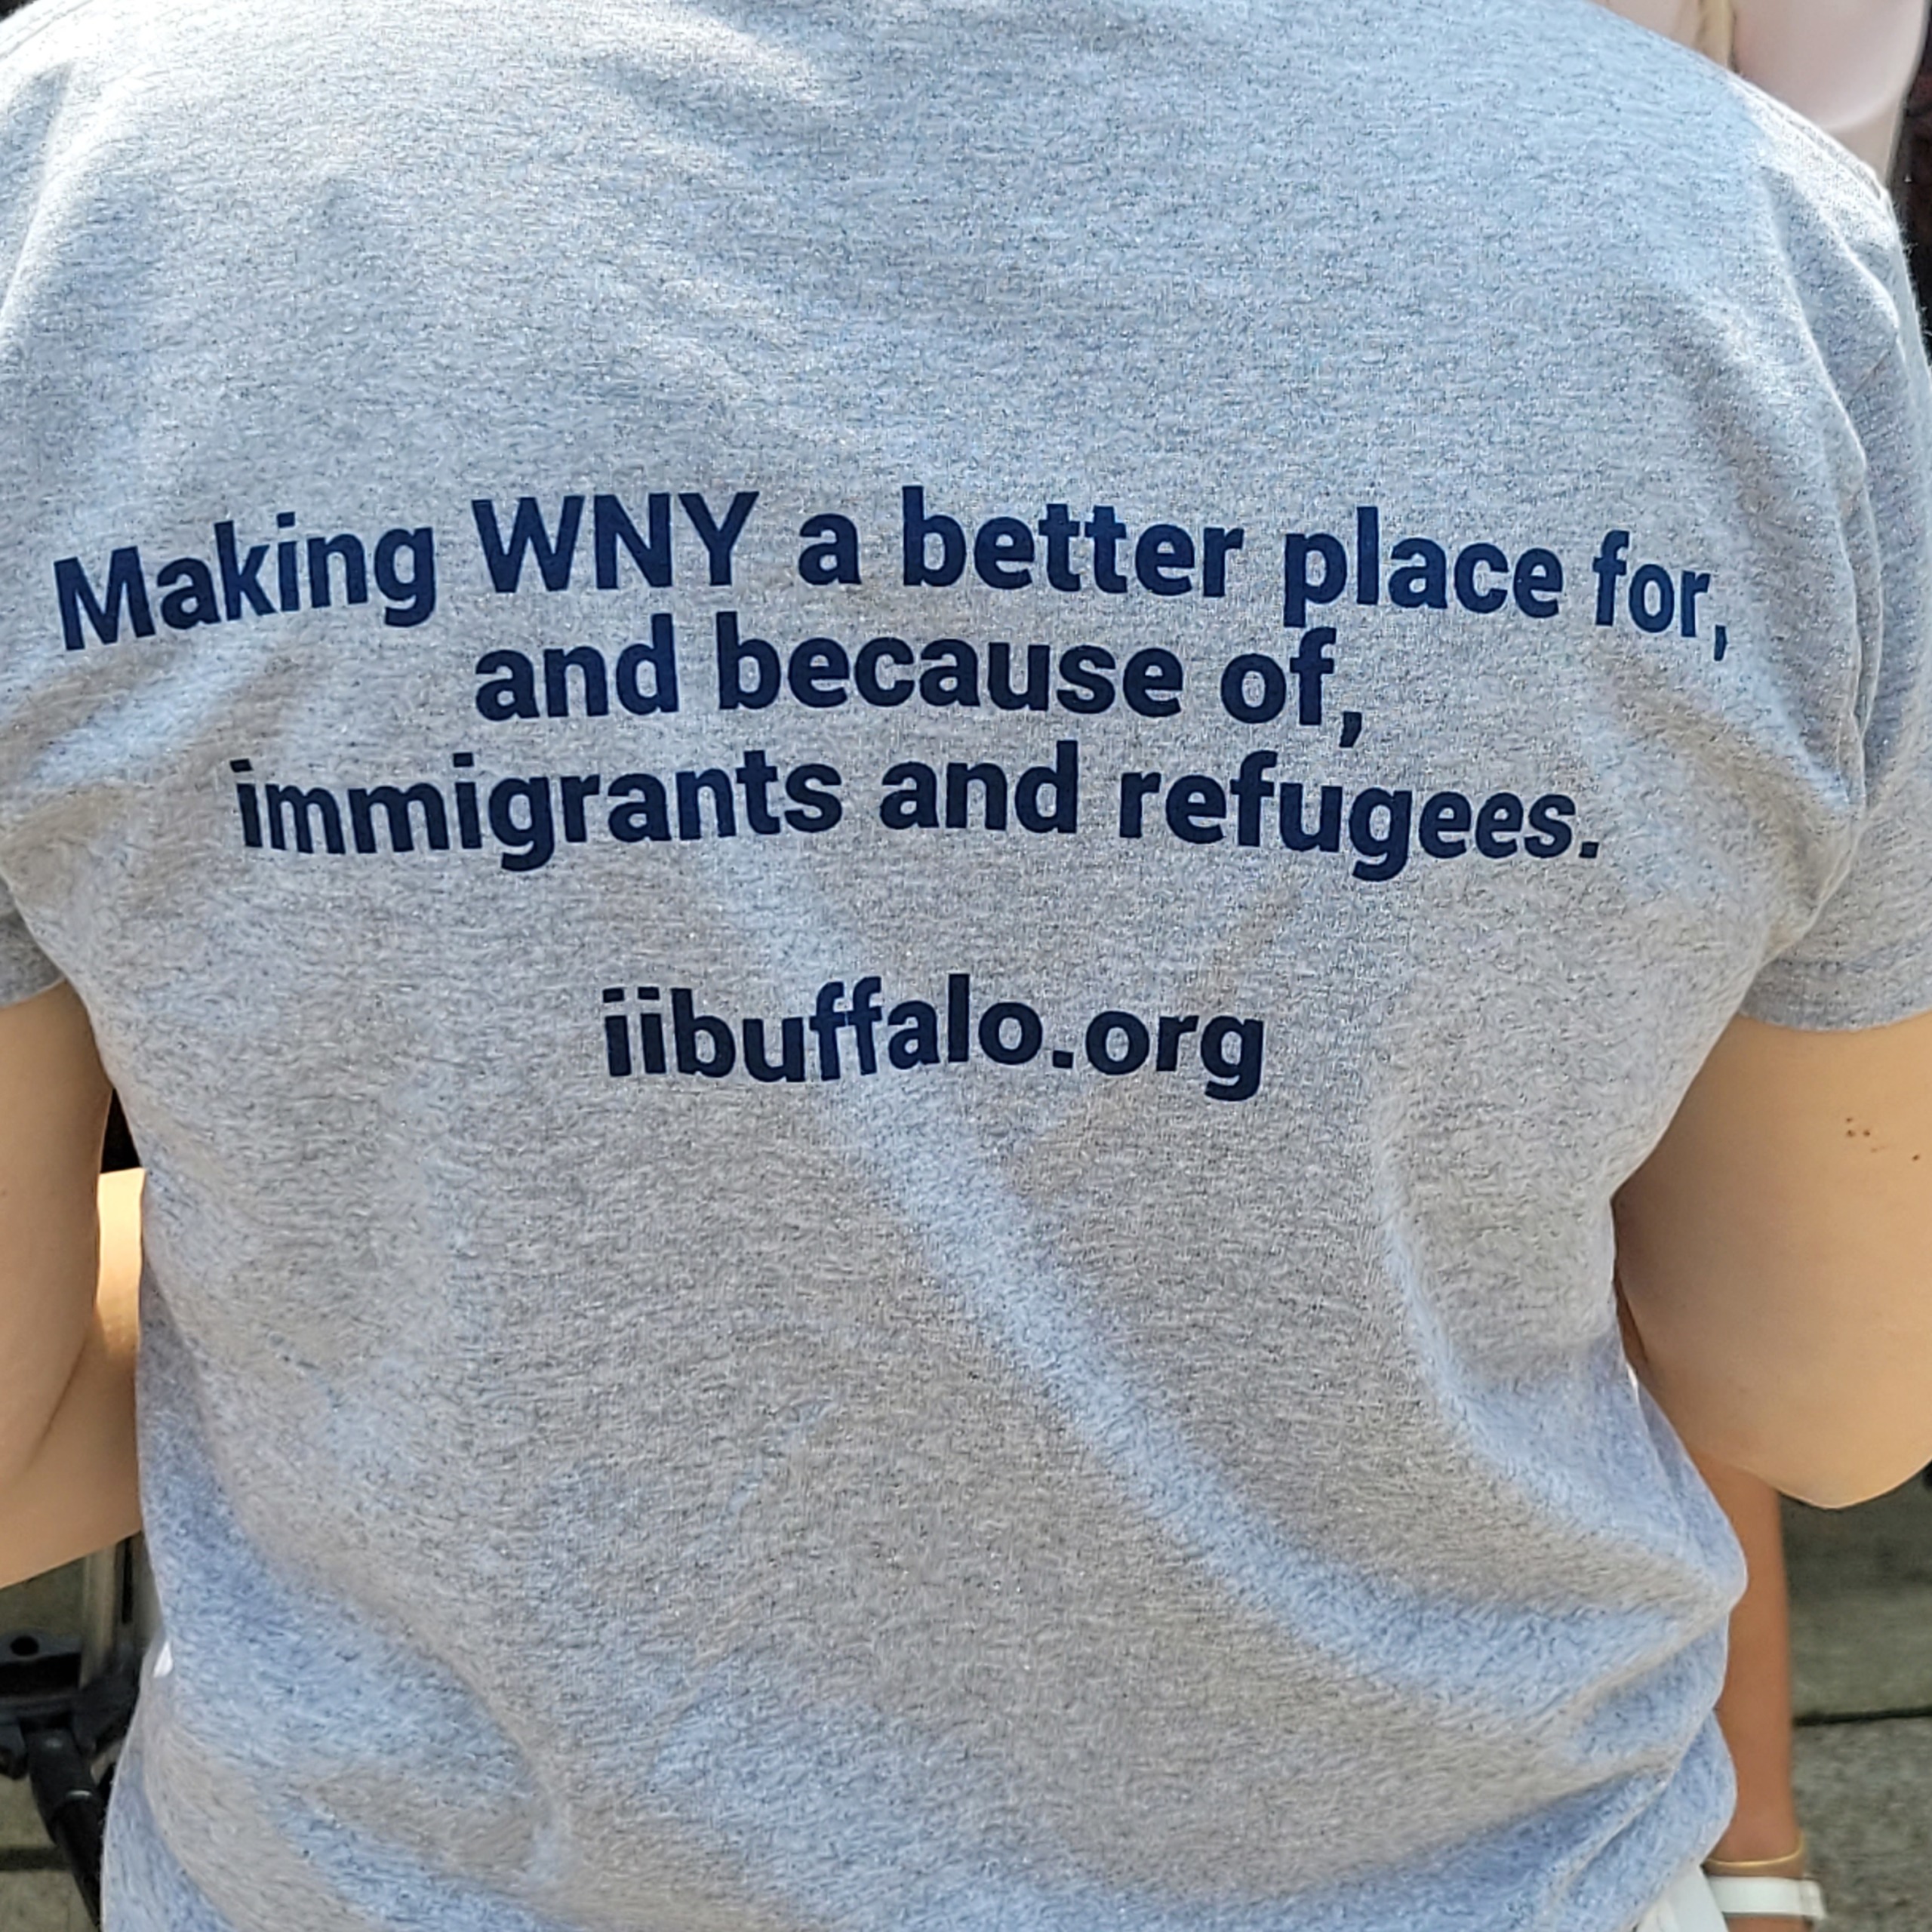 Tshirt with the words, "Making WNY a better place for, and because of immigrants and refugees."